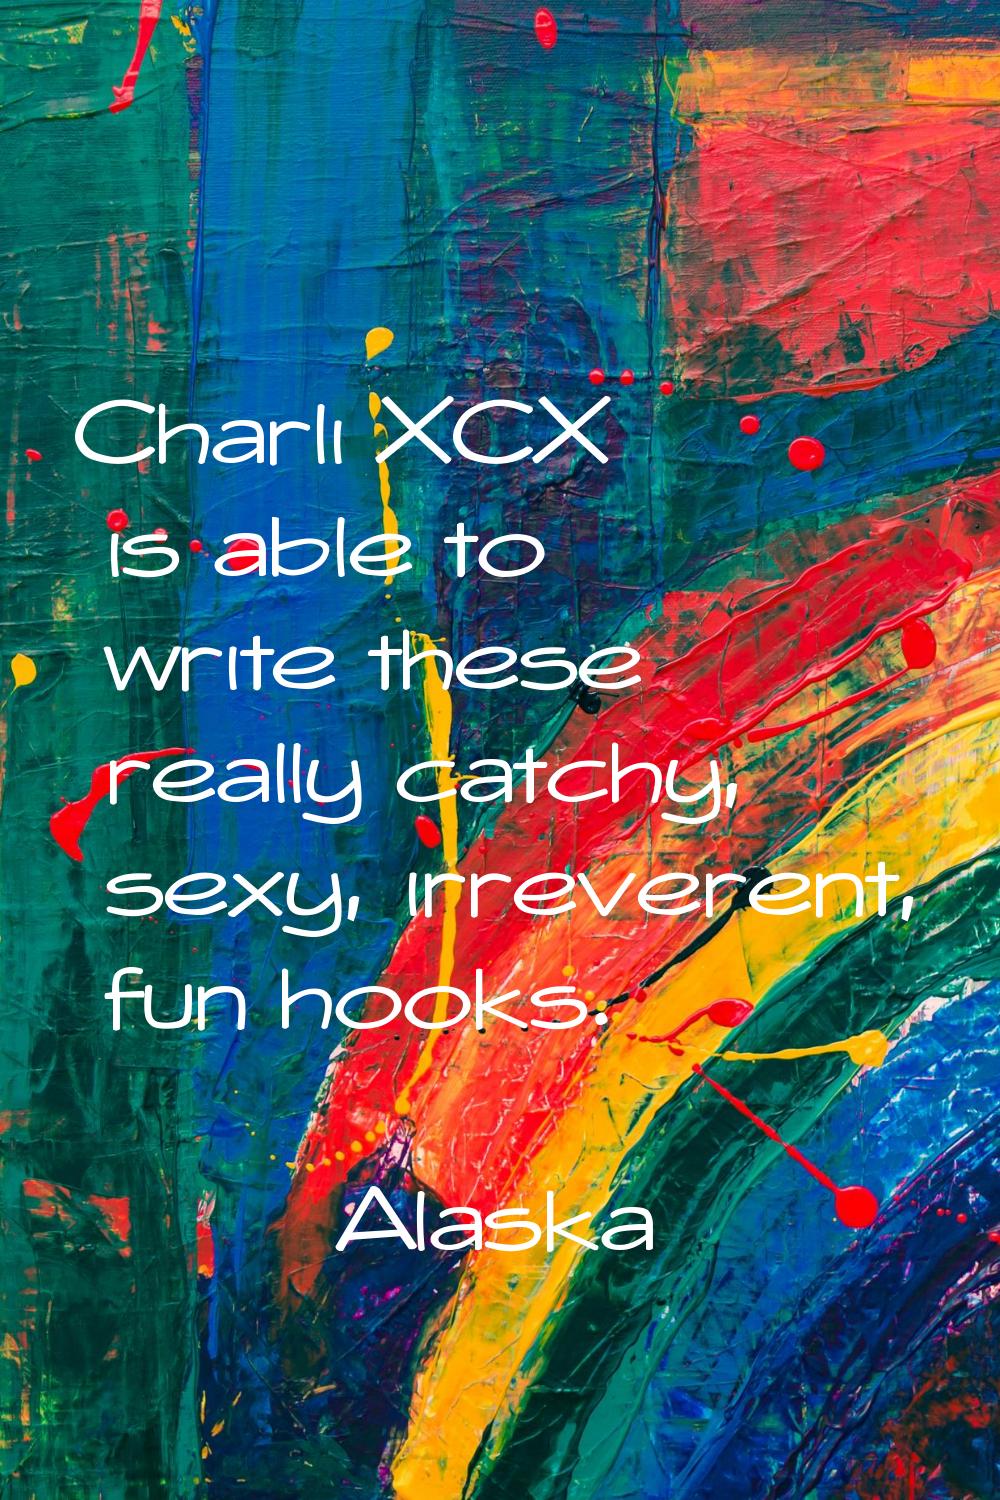 Charli XCX is able to write these really catchy, sexy, irreverent, fun hooks.